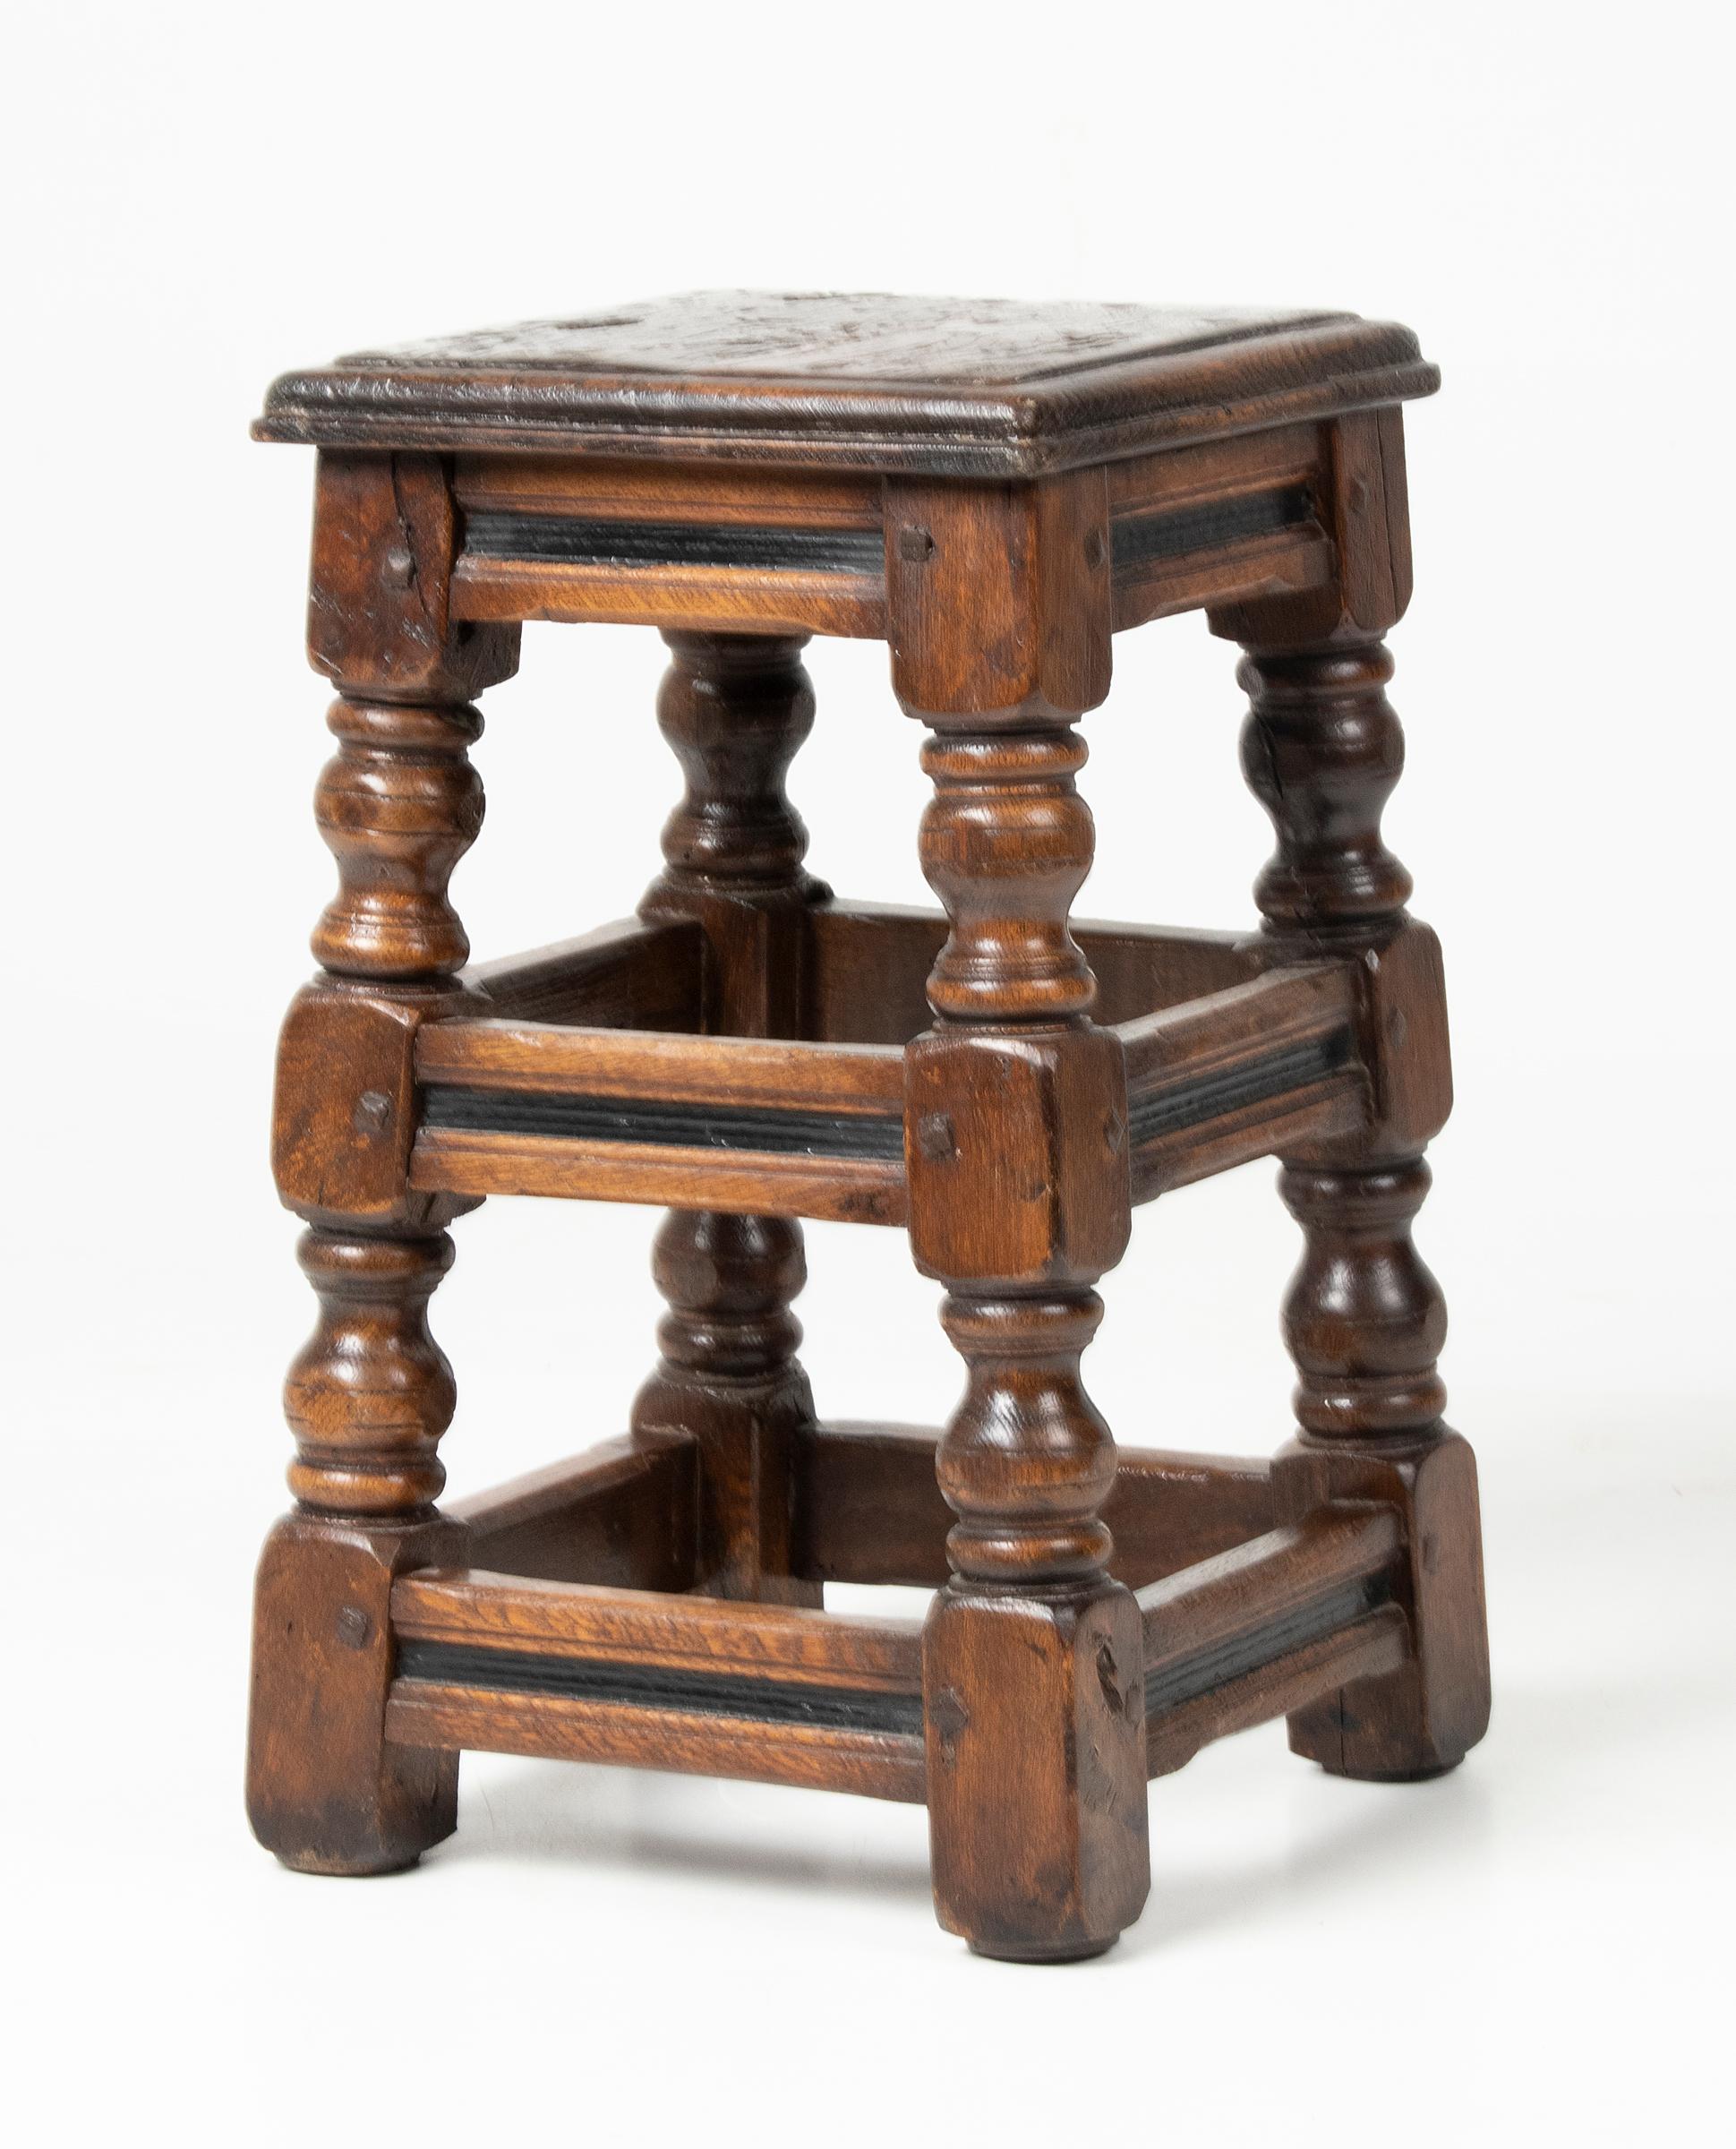 Beautiful antique stool, made of solid oak.
The wood has a beautiful weathered patina.
The stool is stable and sturdy. Constructively in order.